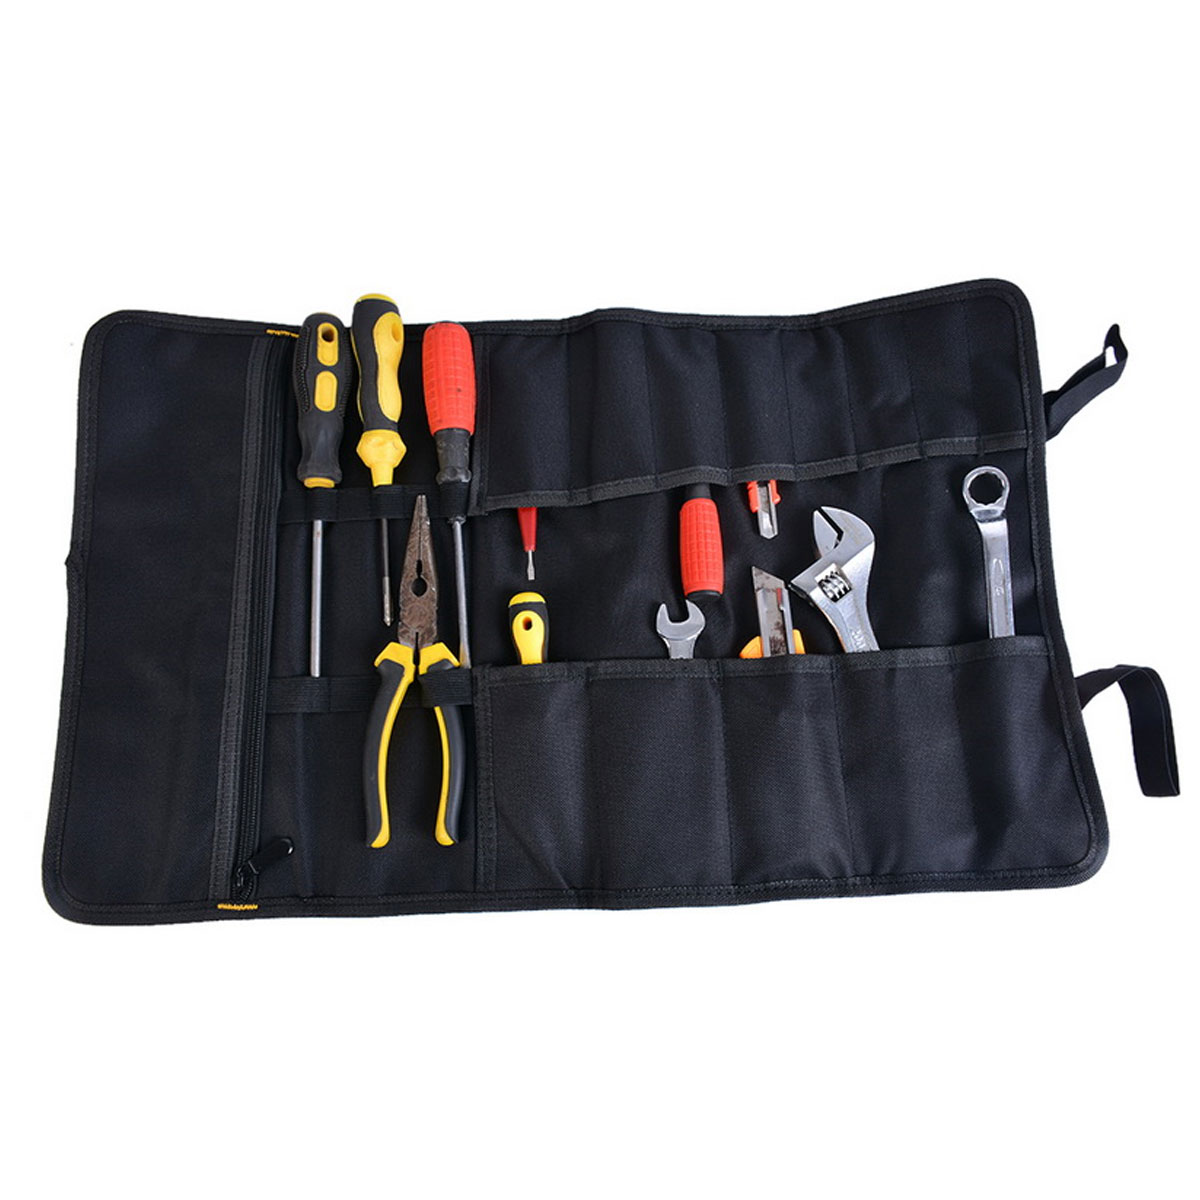 US Pocket Canvas Spanner Wrench Tool Roll Up Storage Bags Organizer Pouch Oxfors